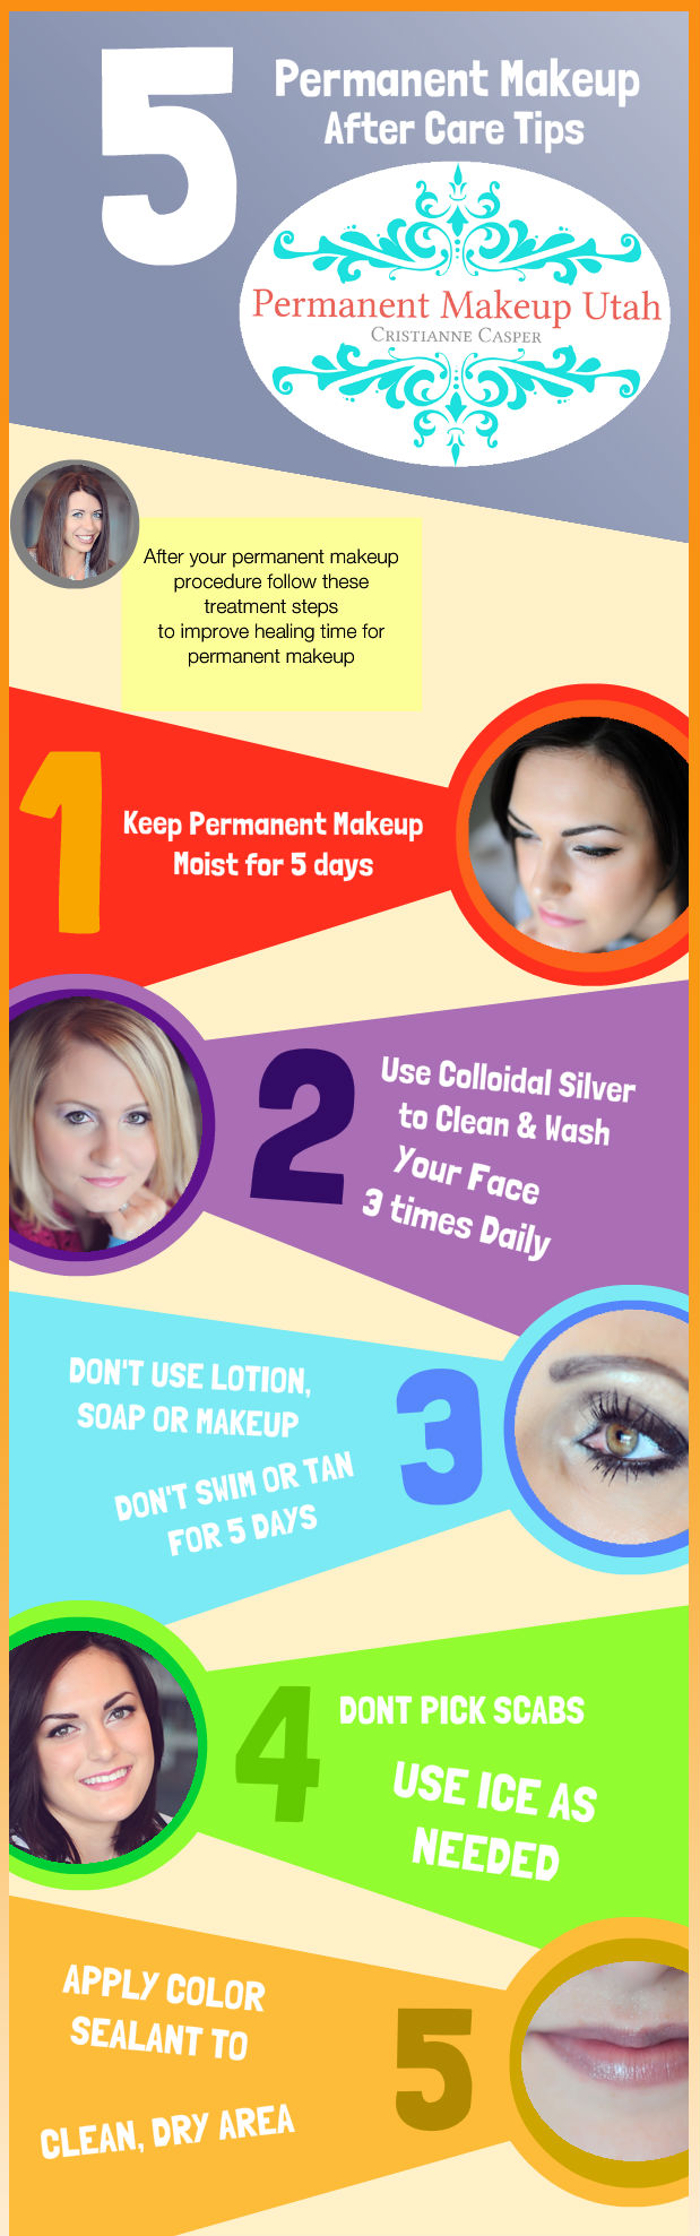 5 Permanent Makeup After Care Tips